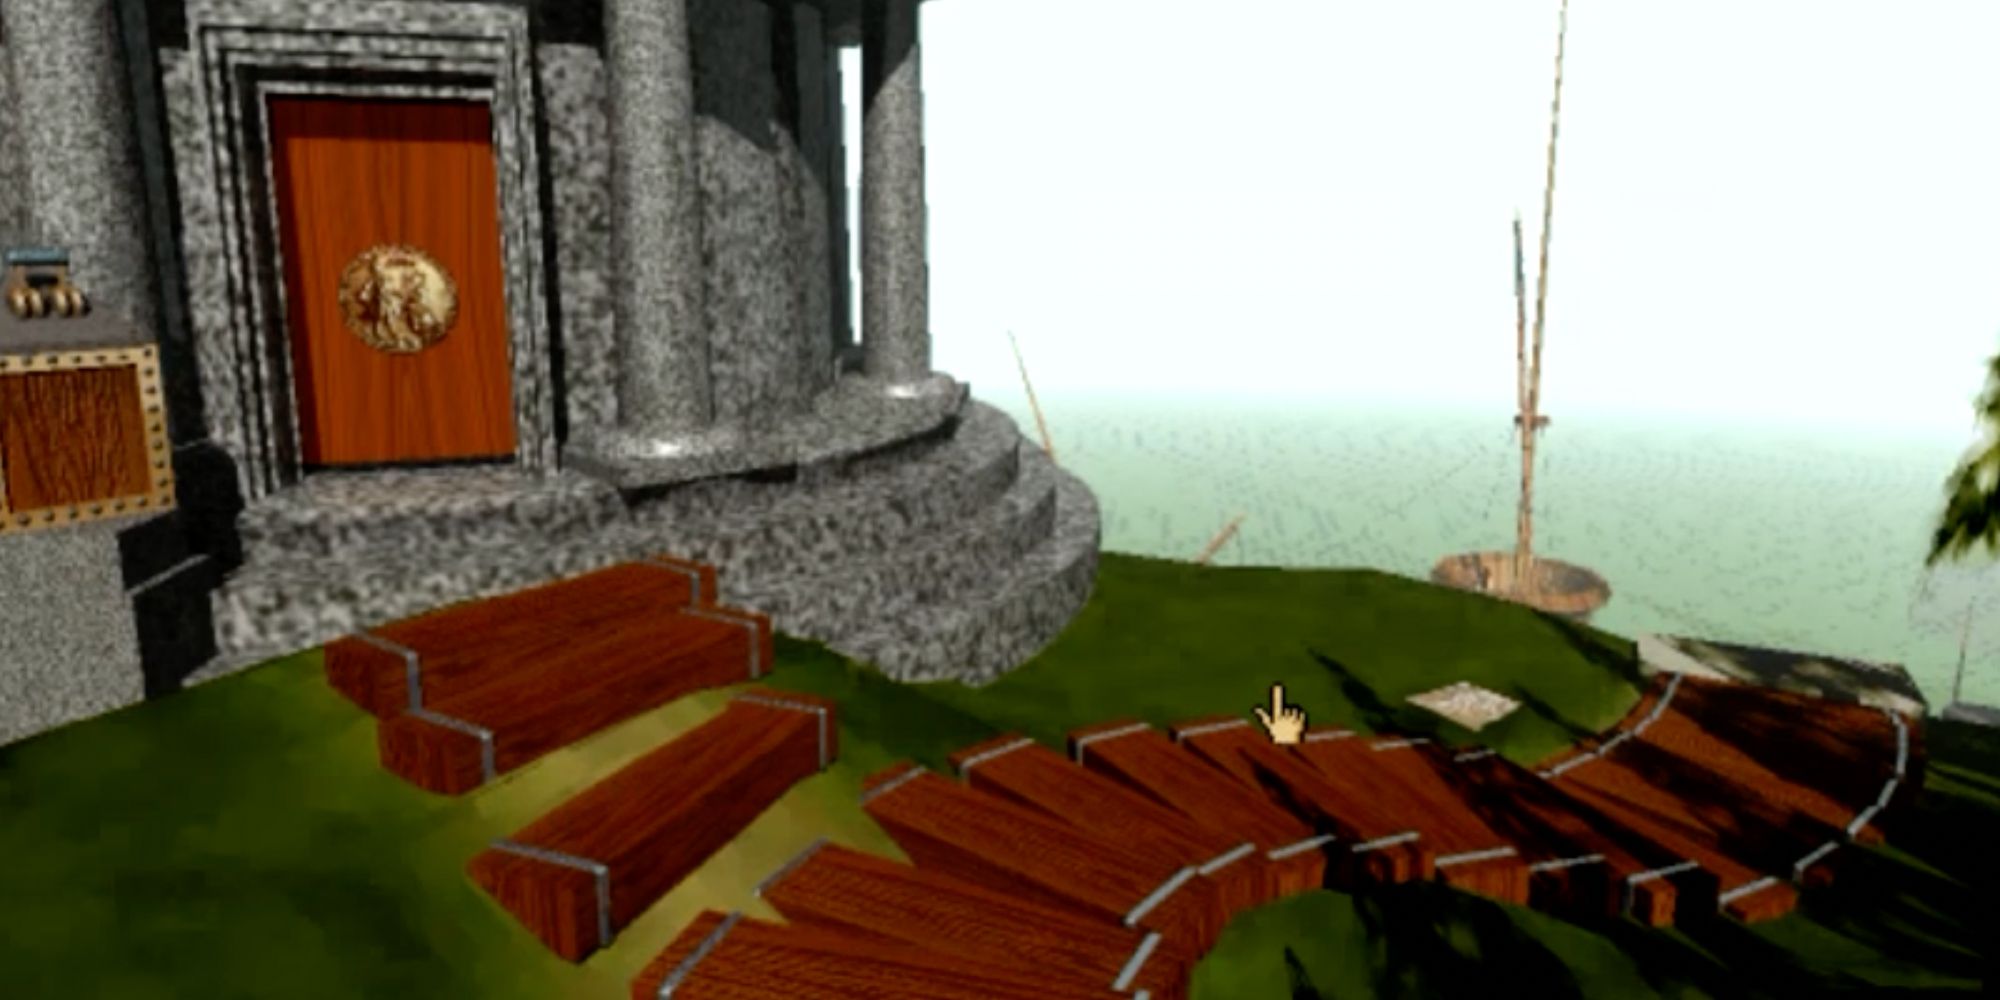 A screenshot from the original Myst, showing a stone building next to a set of stairs that leads to a foggy harbor